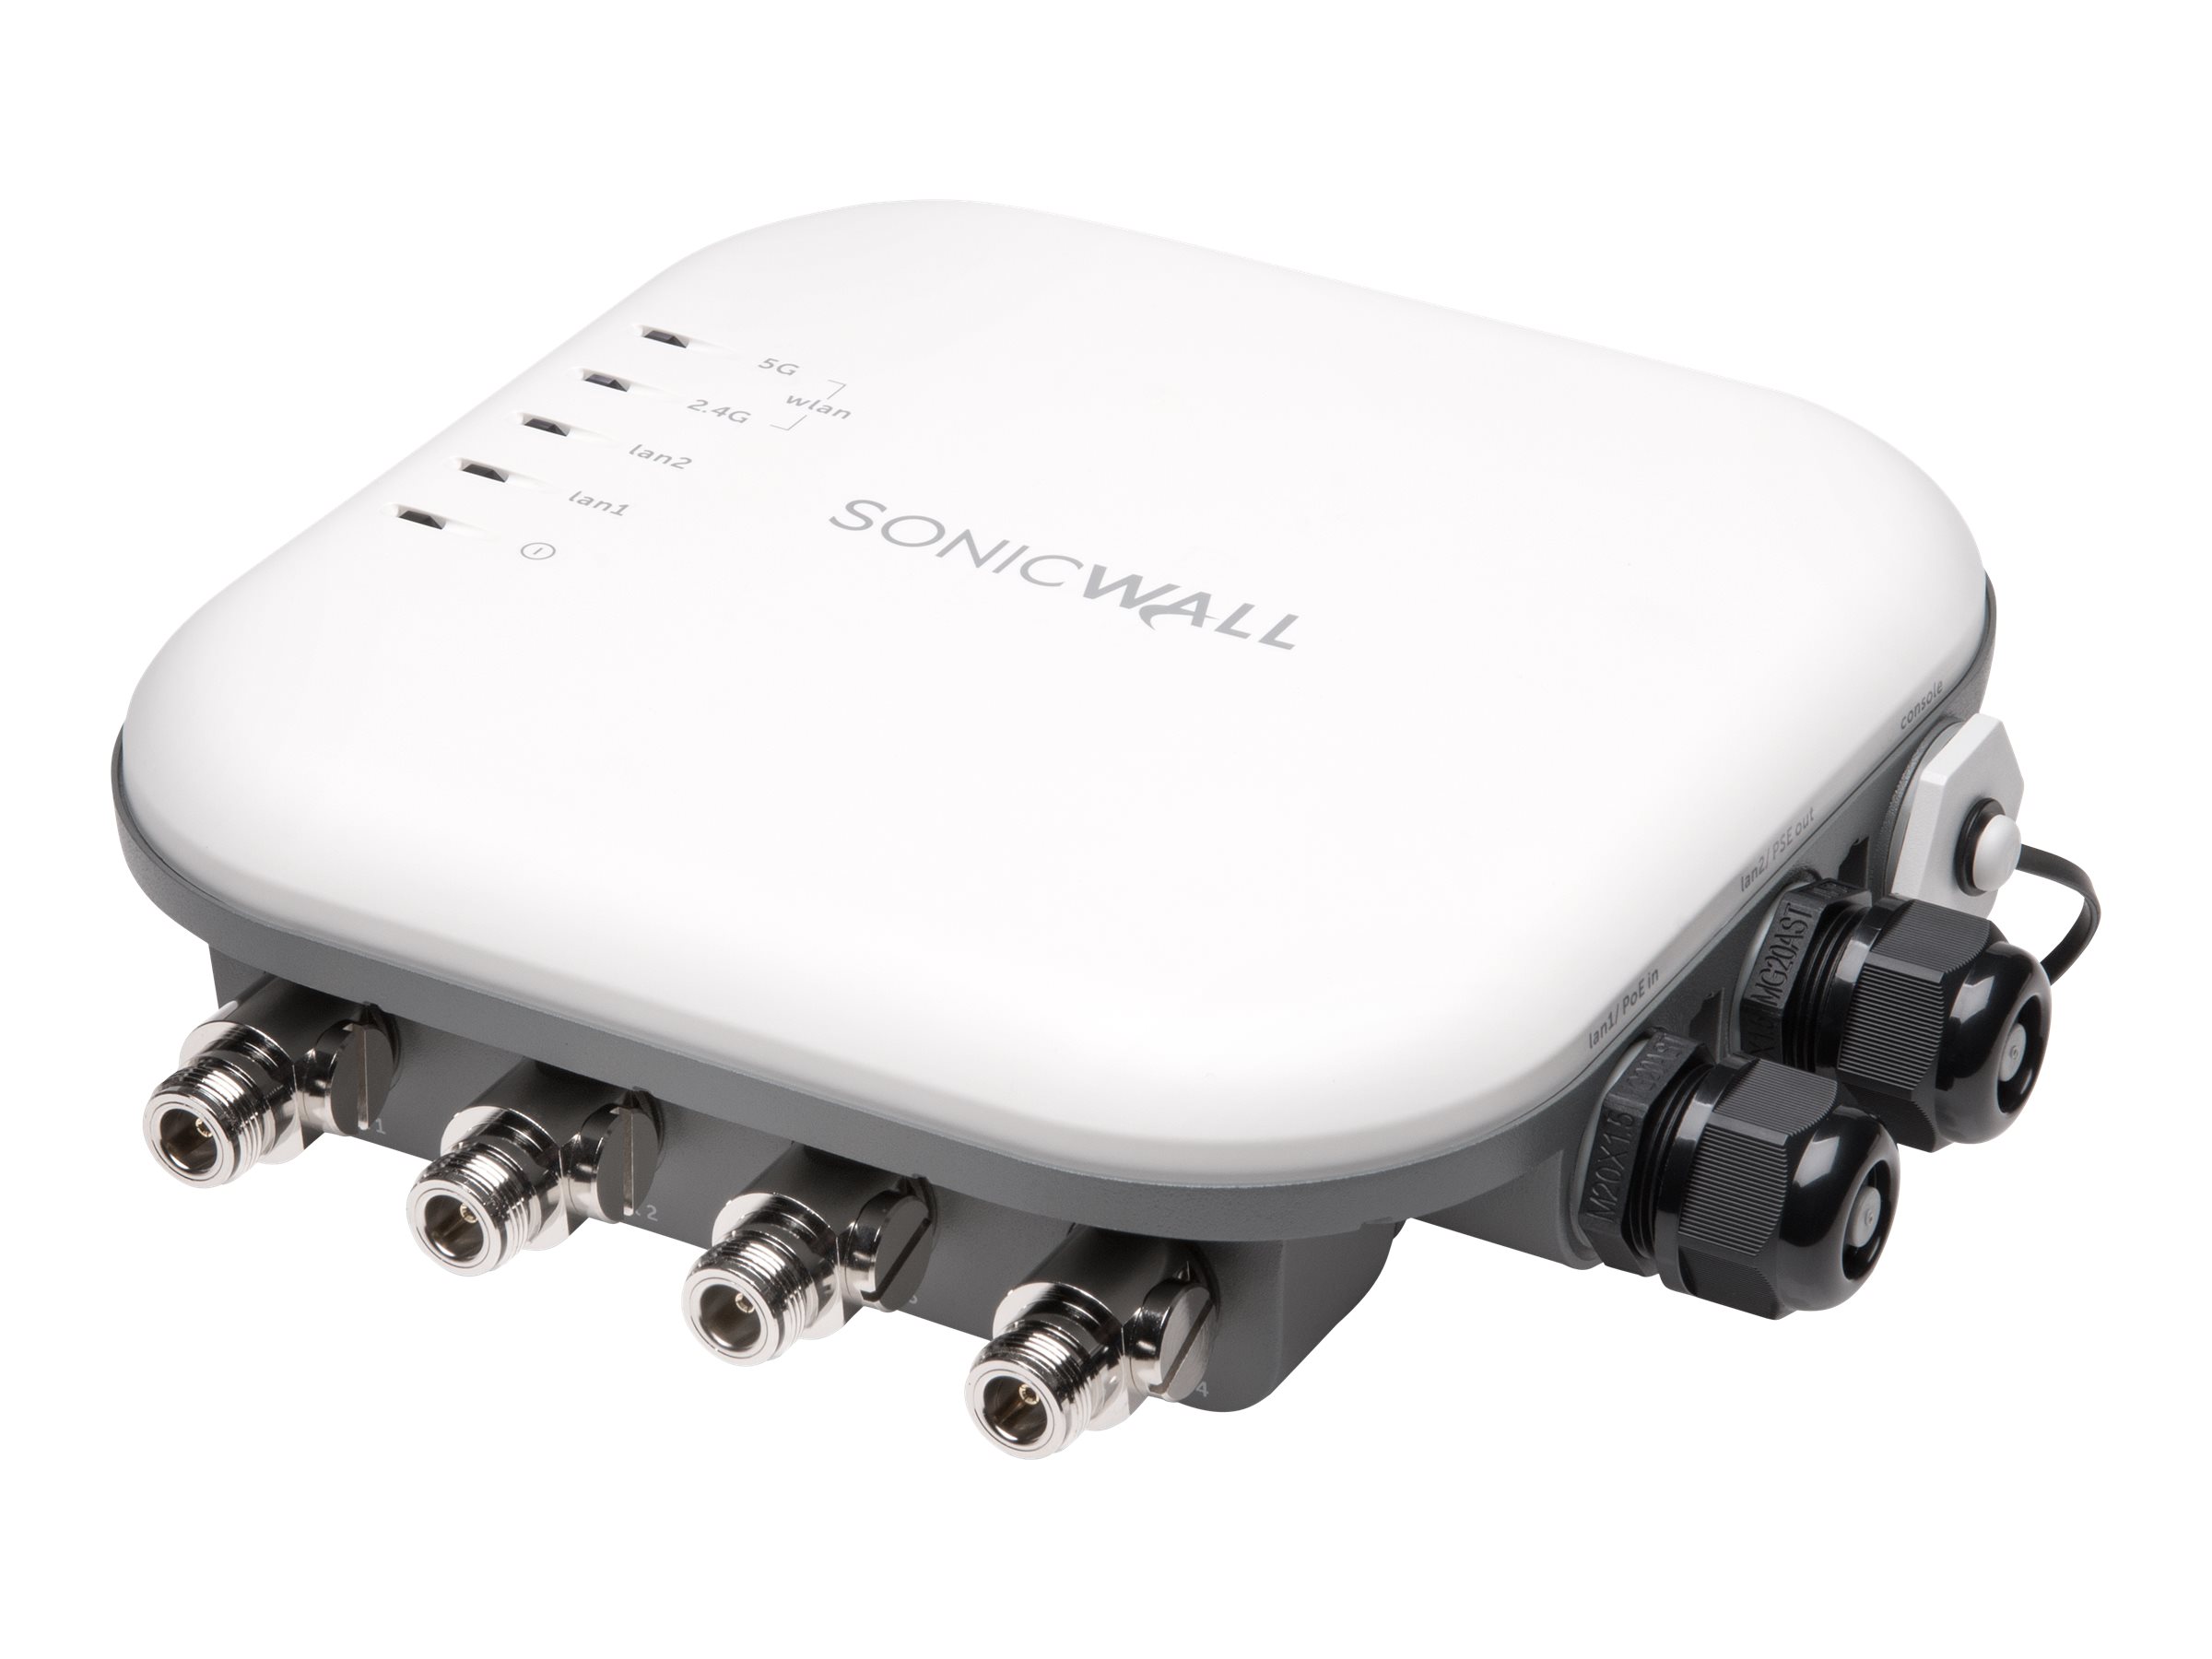 SonicWall SonicWave 432o - Accesspoint - mit 5 Jahre Advanced Secure Cloud WiFi Management und Support - Wi-Fi 5 - 2.4 GHz, 5 GH